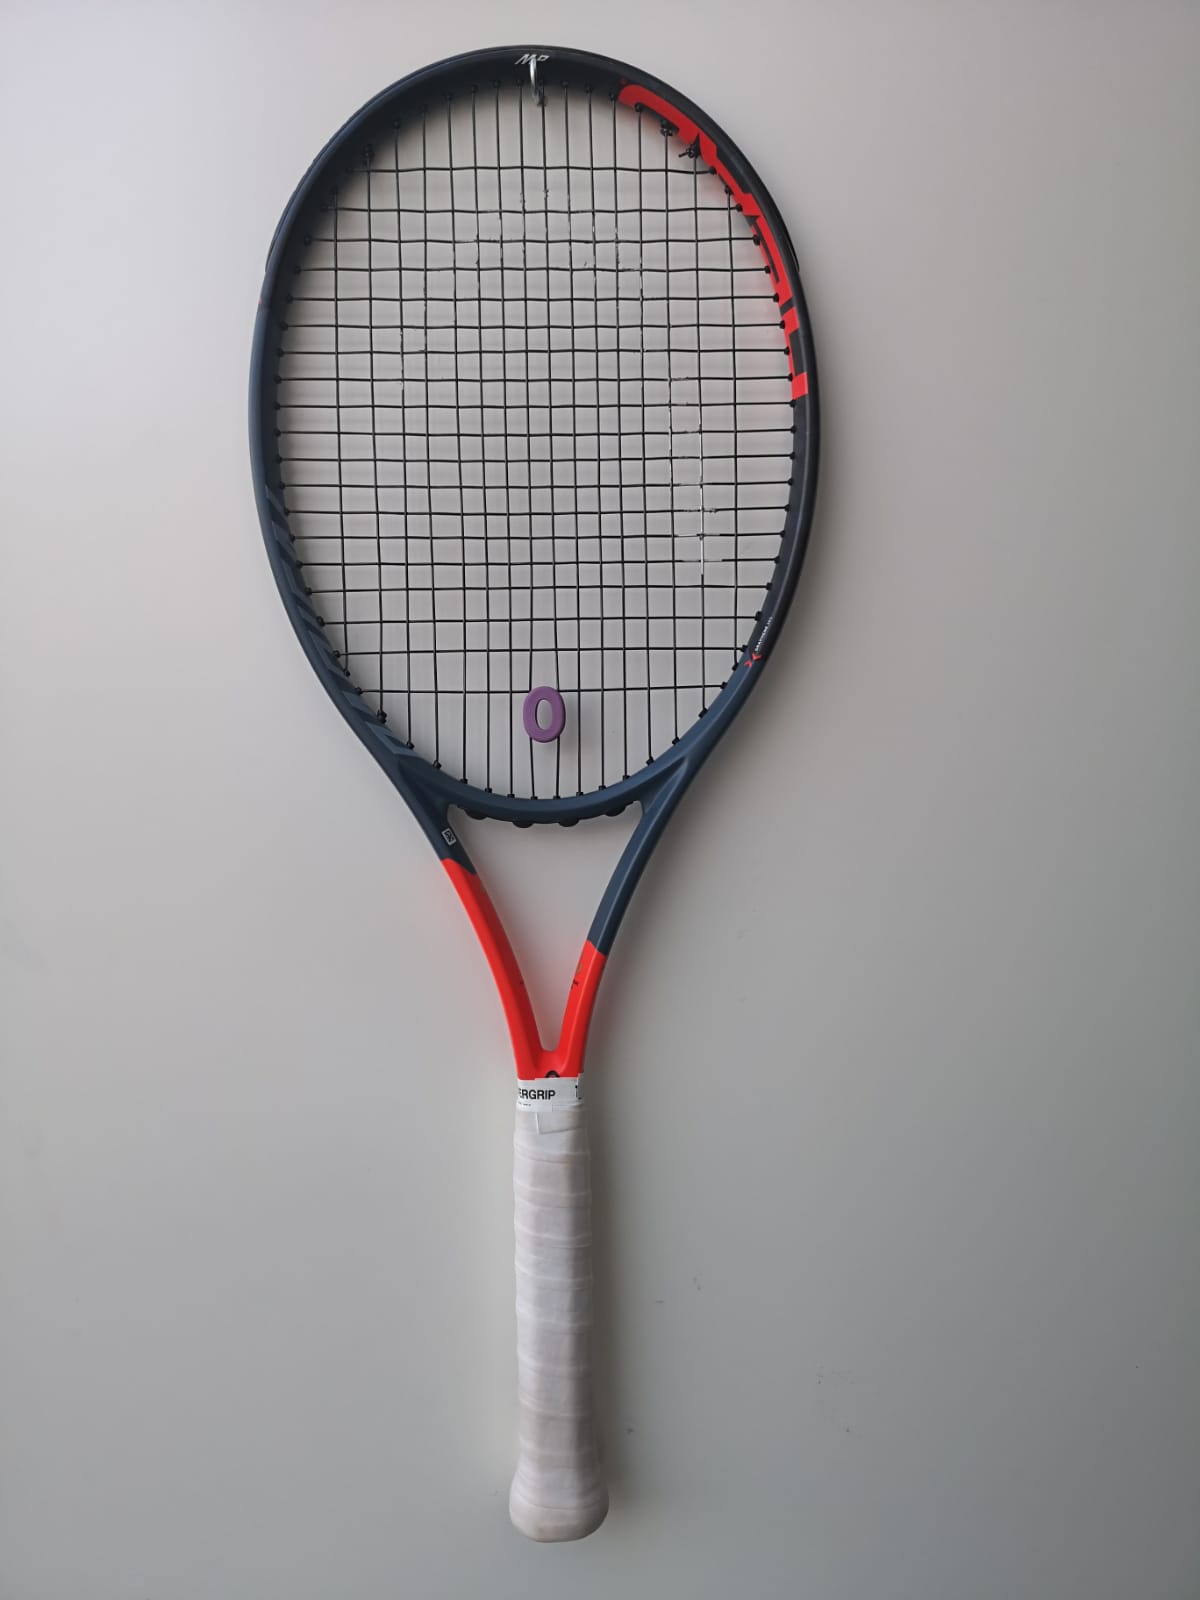 HEAD Graphene 360 Radical MP Racquet Review - The new Radical